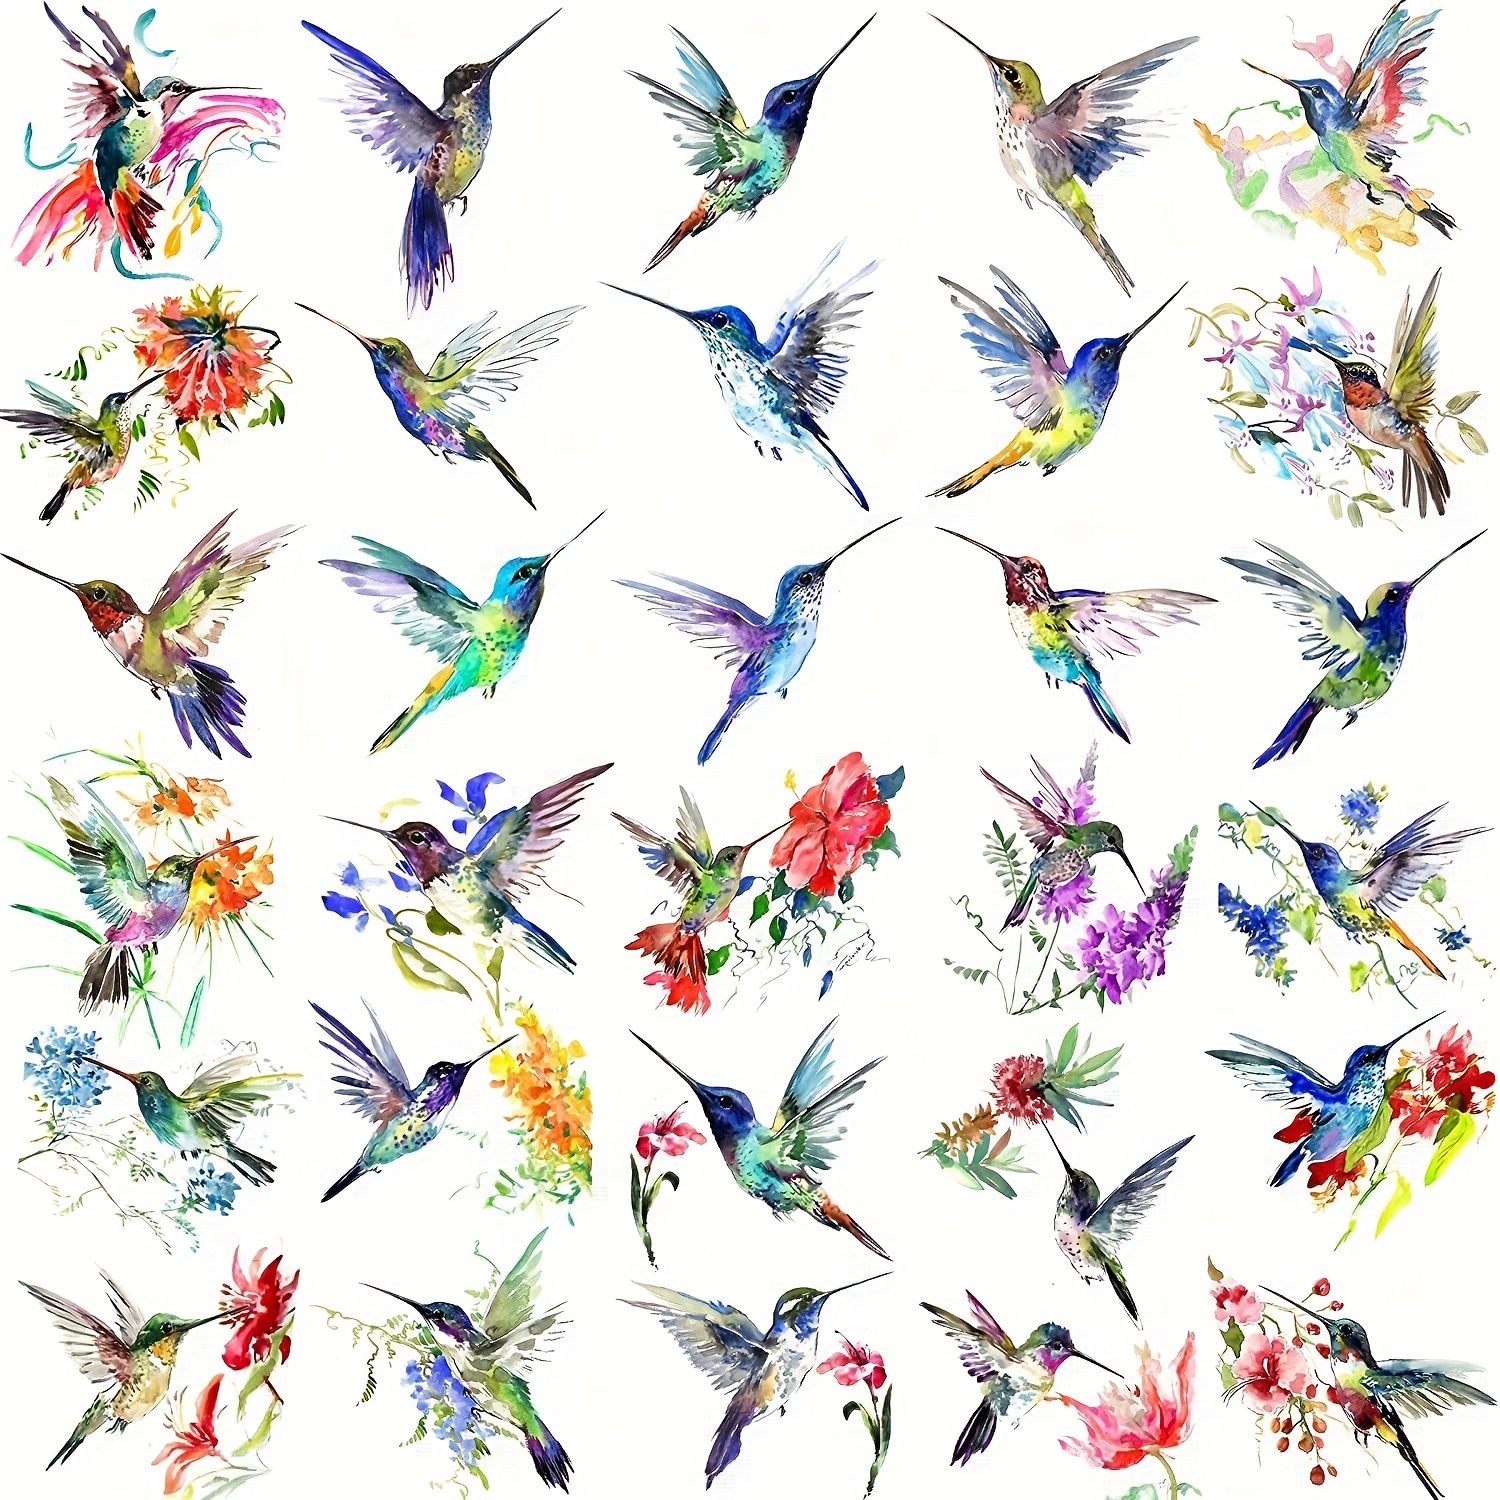 

Coktak 15 Sheets 3d Watercolor Hummingbird Temporary Tattoos For Women Girl Small Multicolor Hummer Birds Tattoo Temporary Colorful Flower Fake Face Tattoo Hands Waterproof Tattoo For Adult